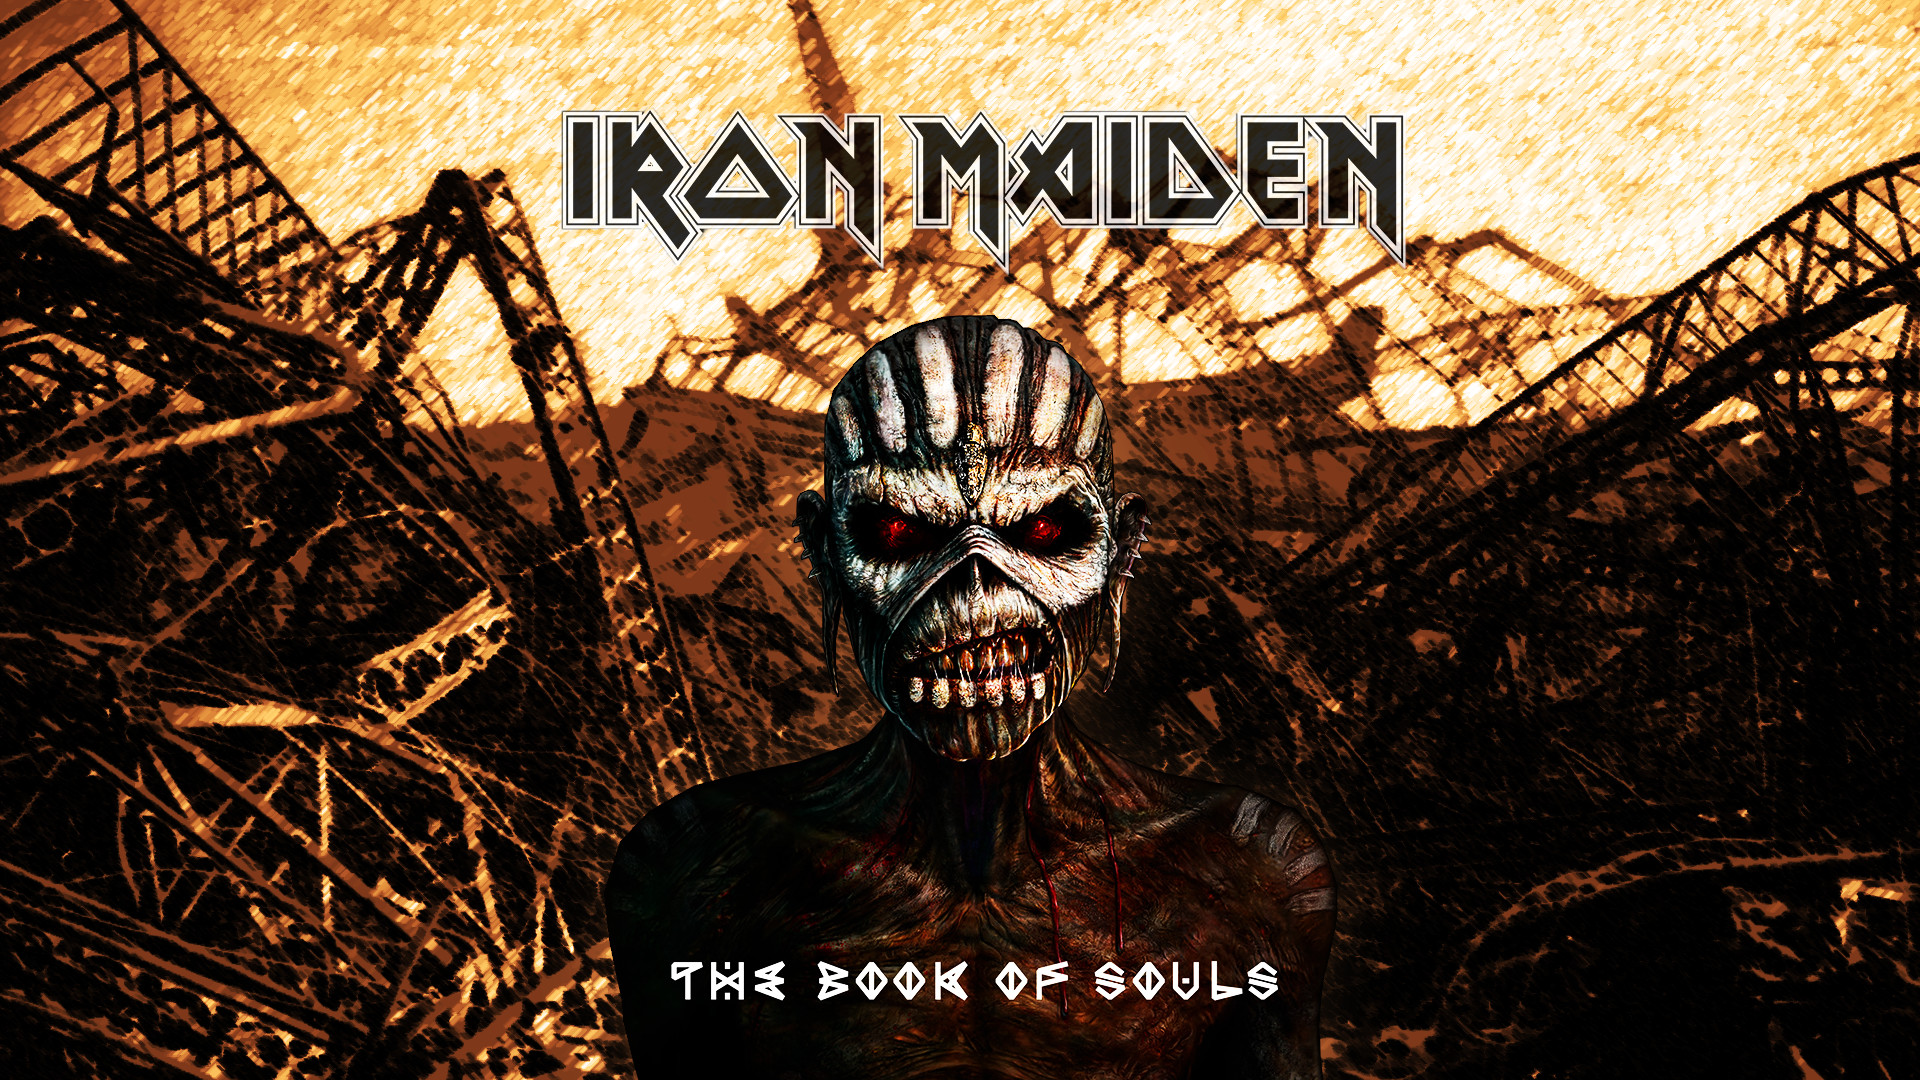 1920x1080 ... Iron Maiden 'The Book of Souls' r101 Wallpaper ...